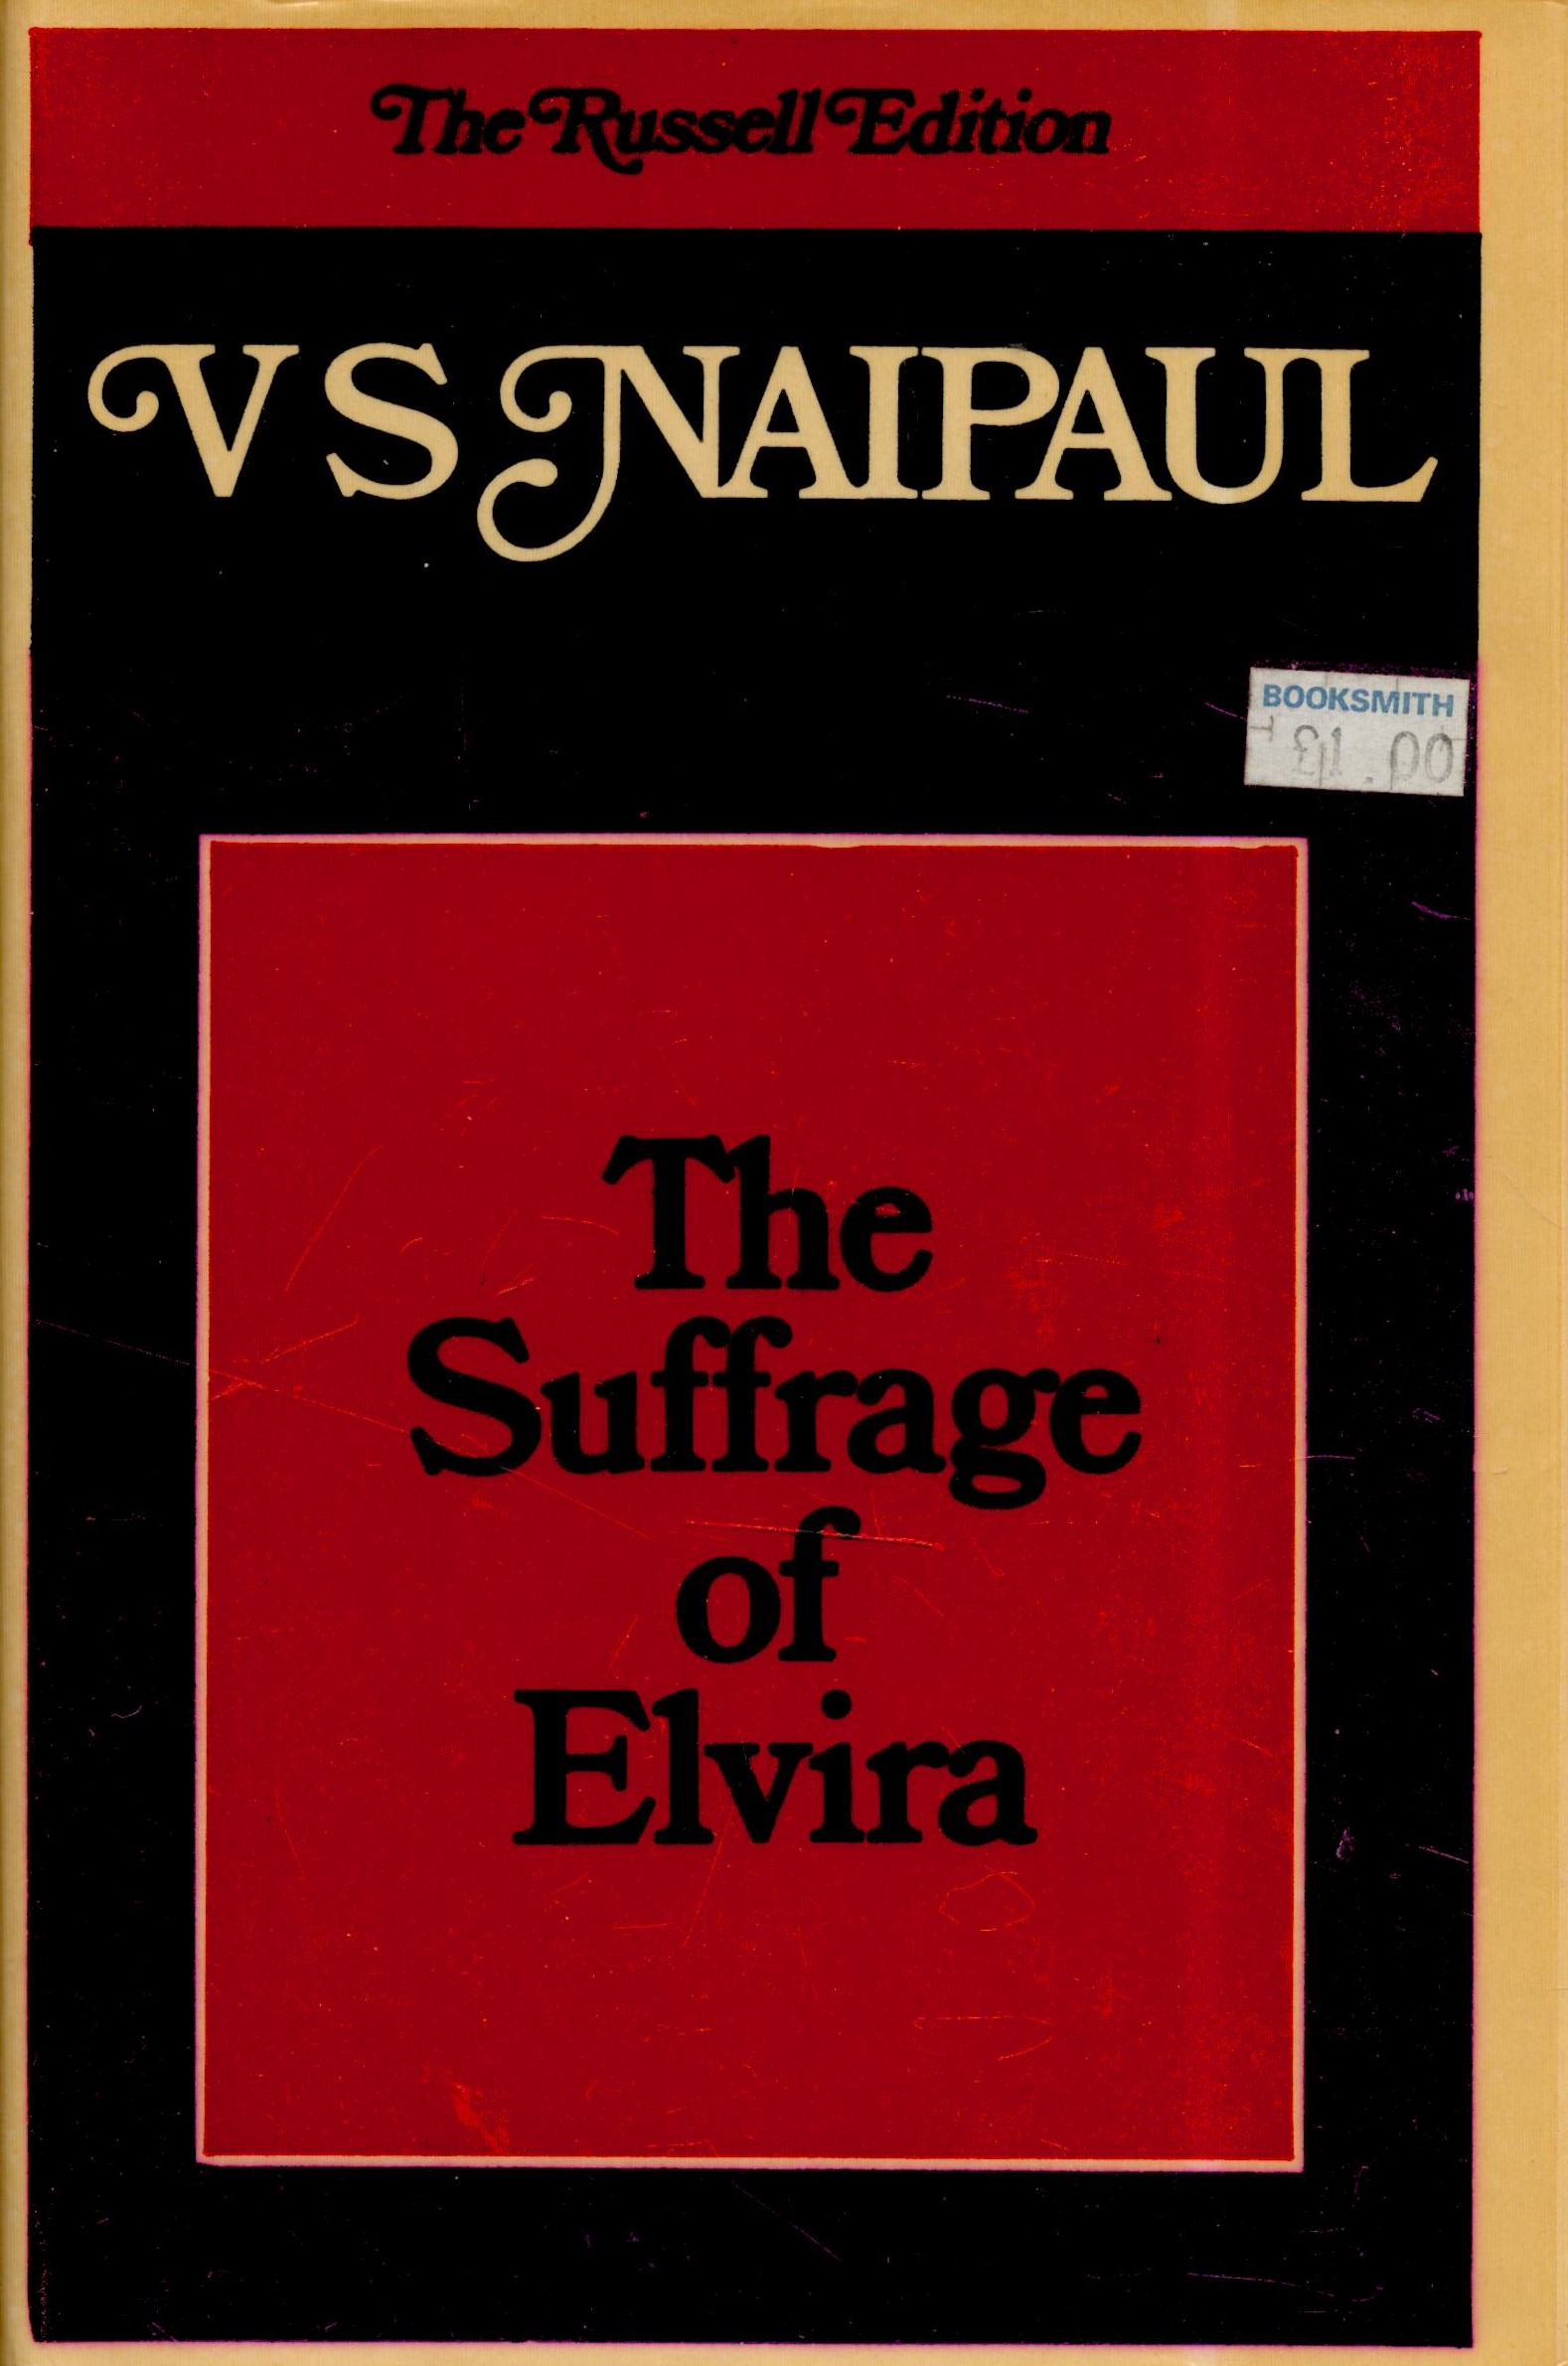 The Suffrage of Elvira by V S Naipaul 1978 Russell Edition Hardback Book with 240 pages published by